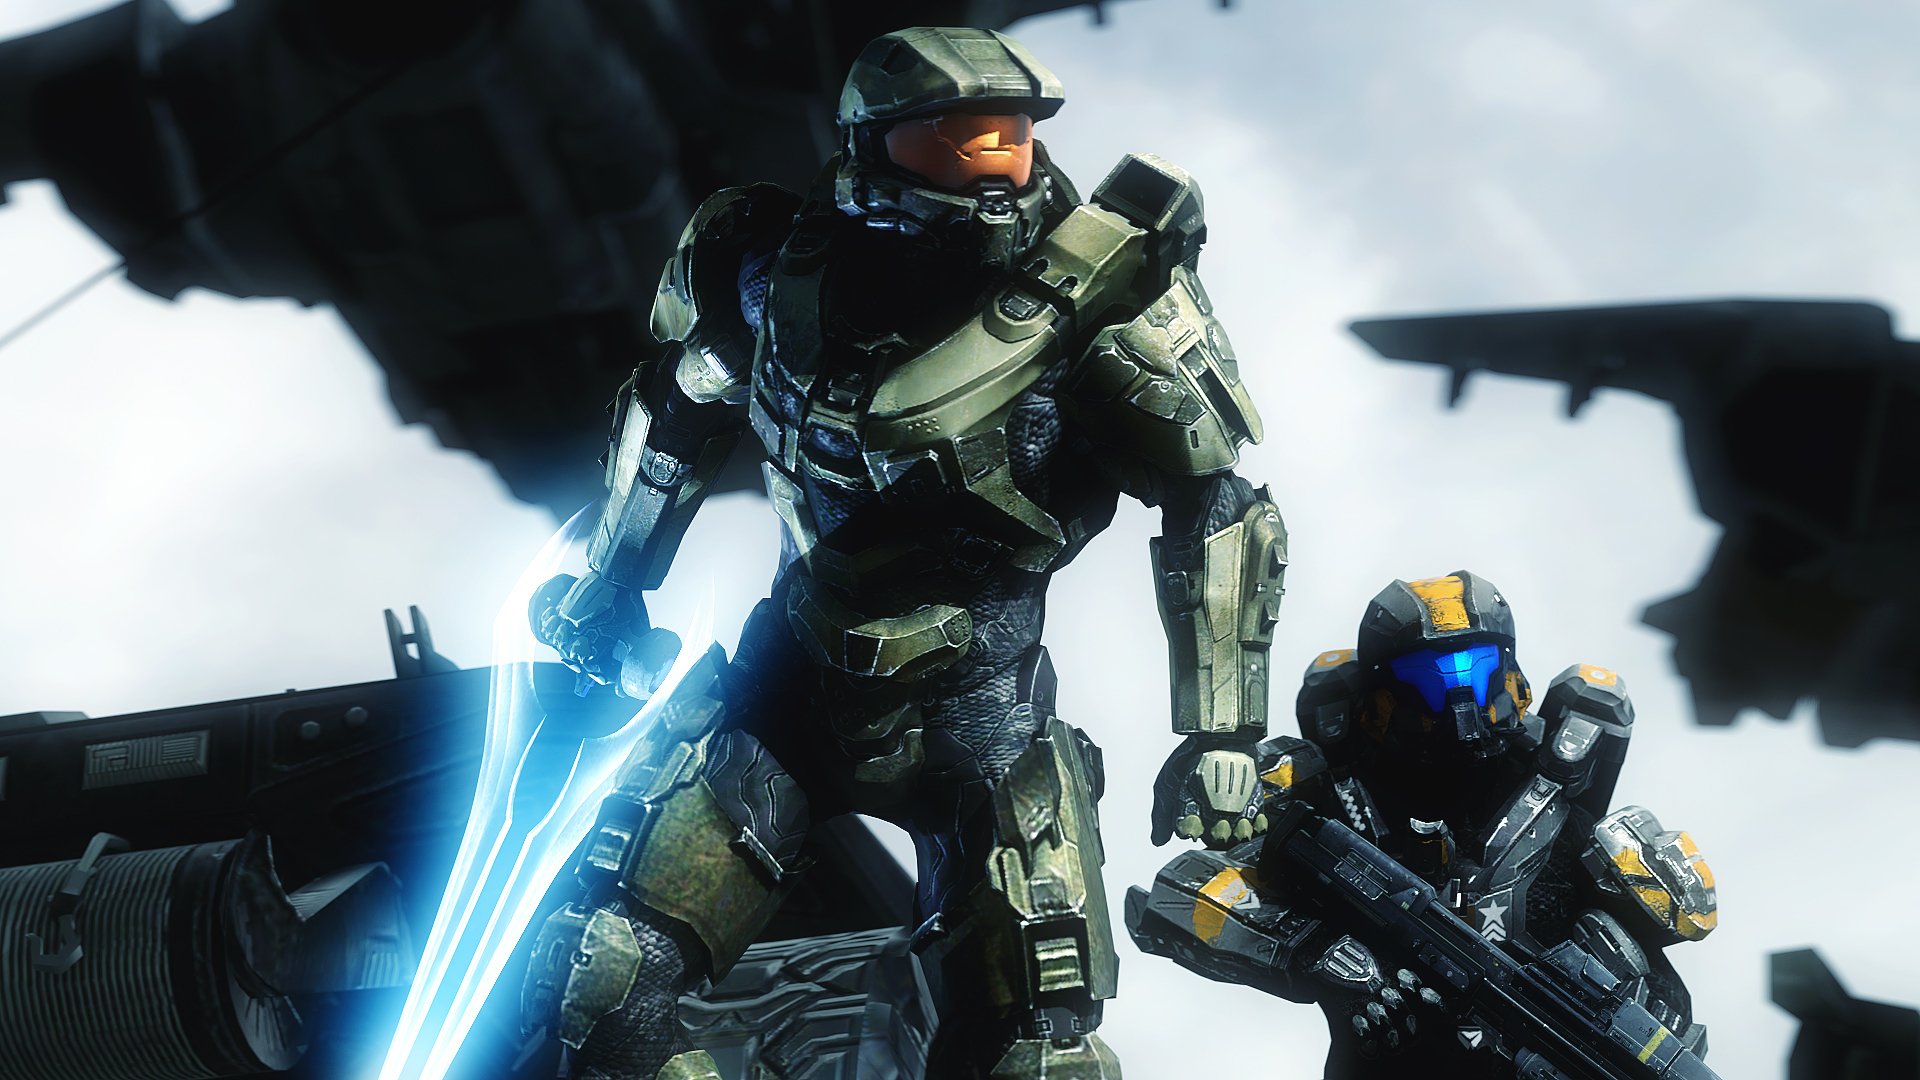 General 1920x1080 Halo 5: Guardians video games Halo (game) video game characters